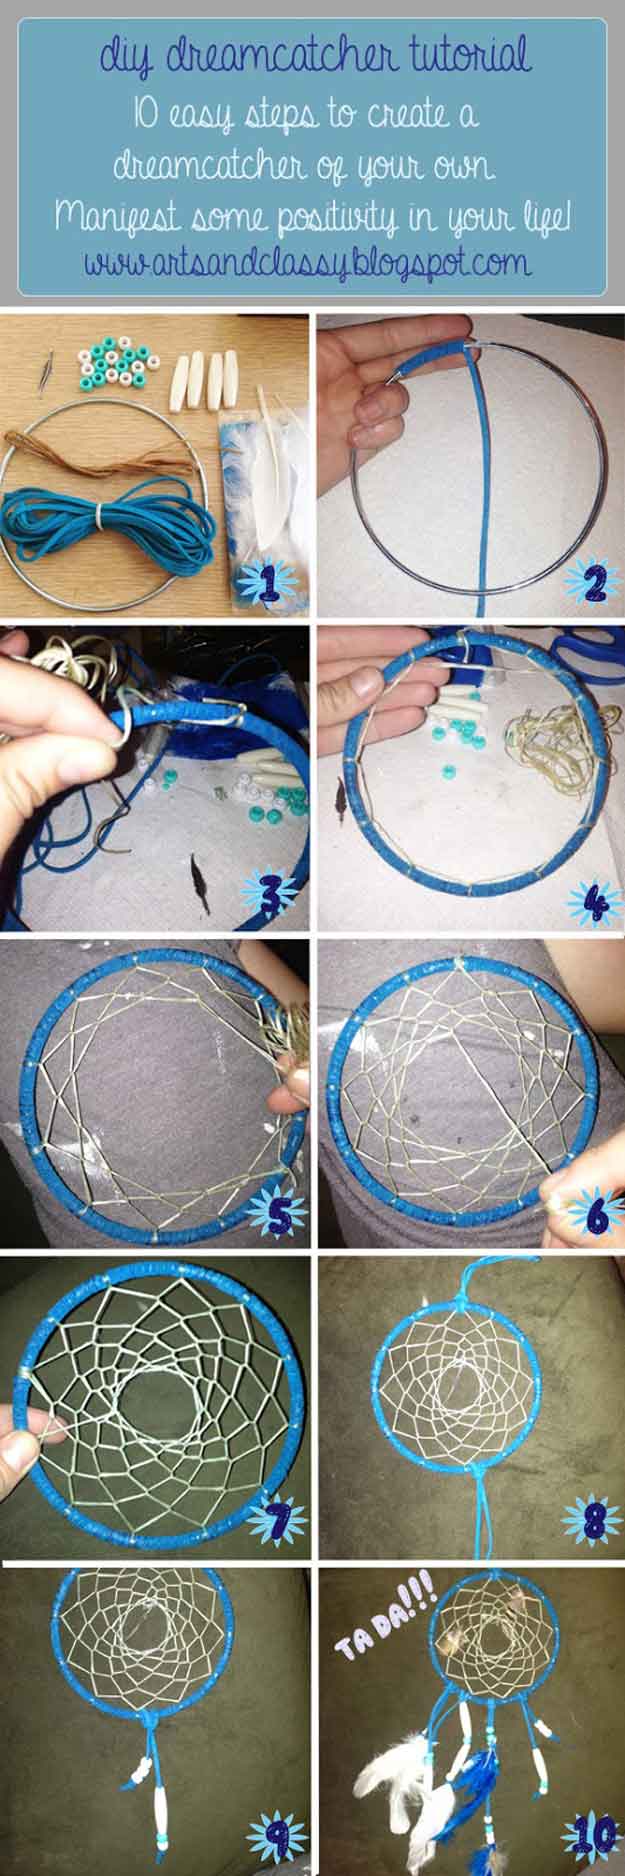 Cute DIY Room Decor Ideas for Teens - DIY Bedroom Projects for Teenagers - How to Make A Dream Catcher